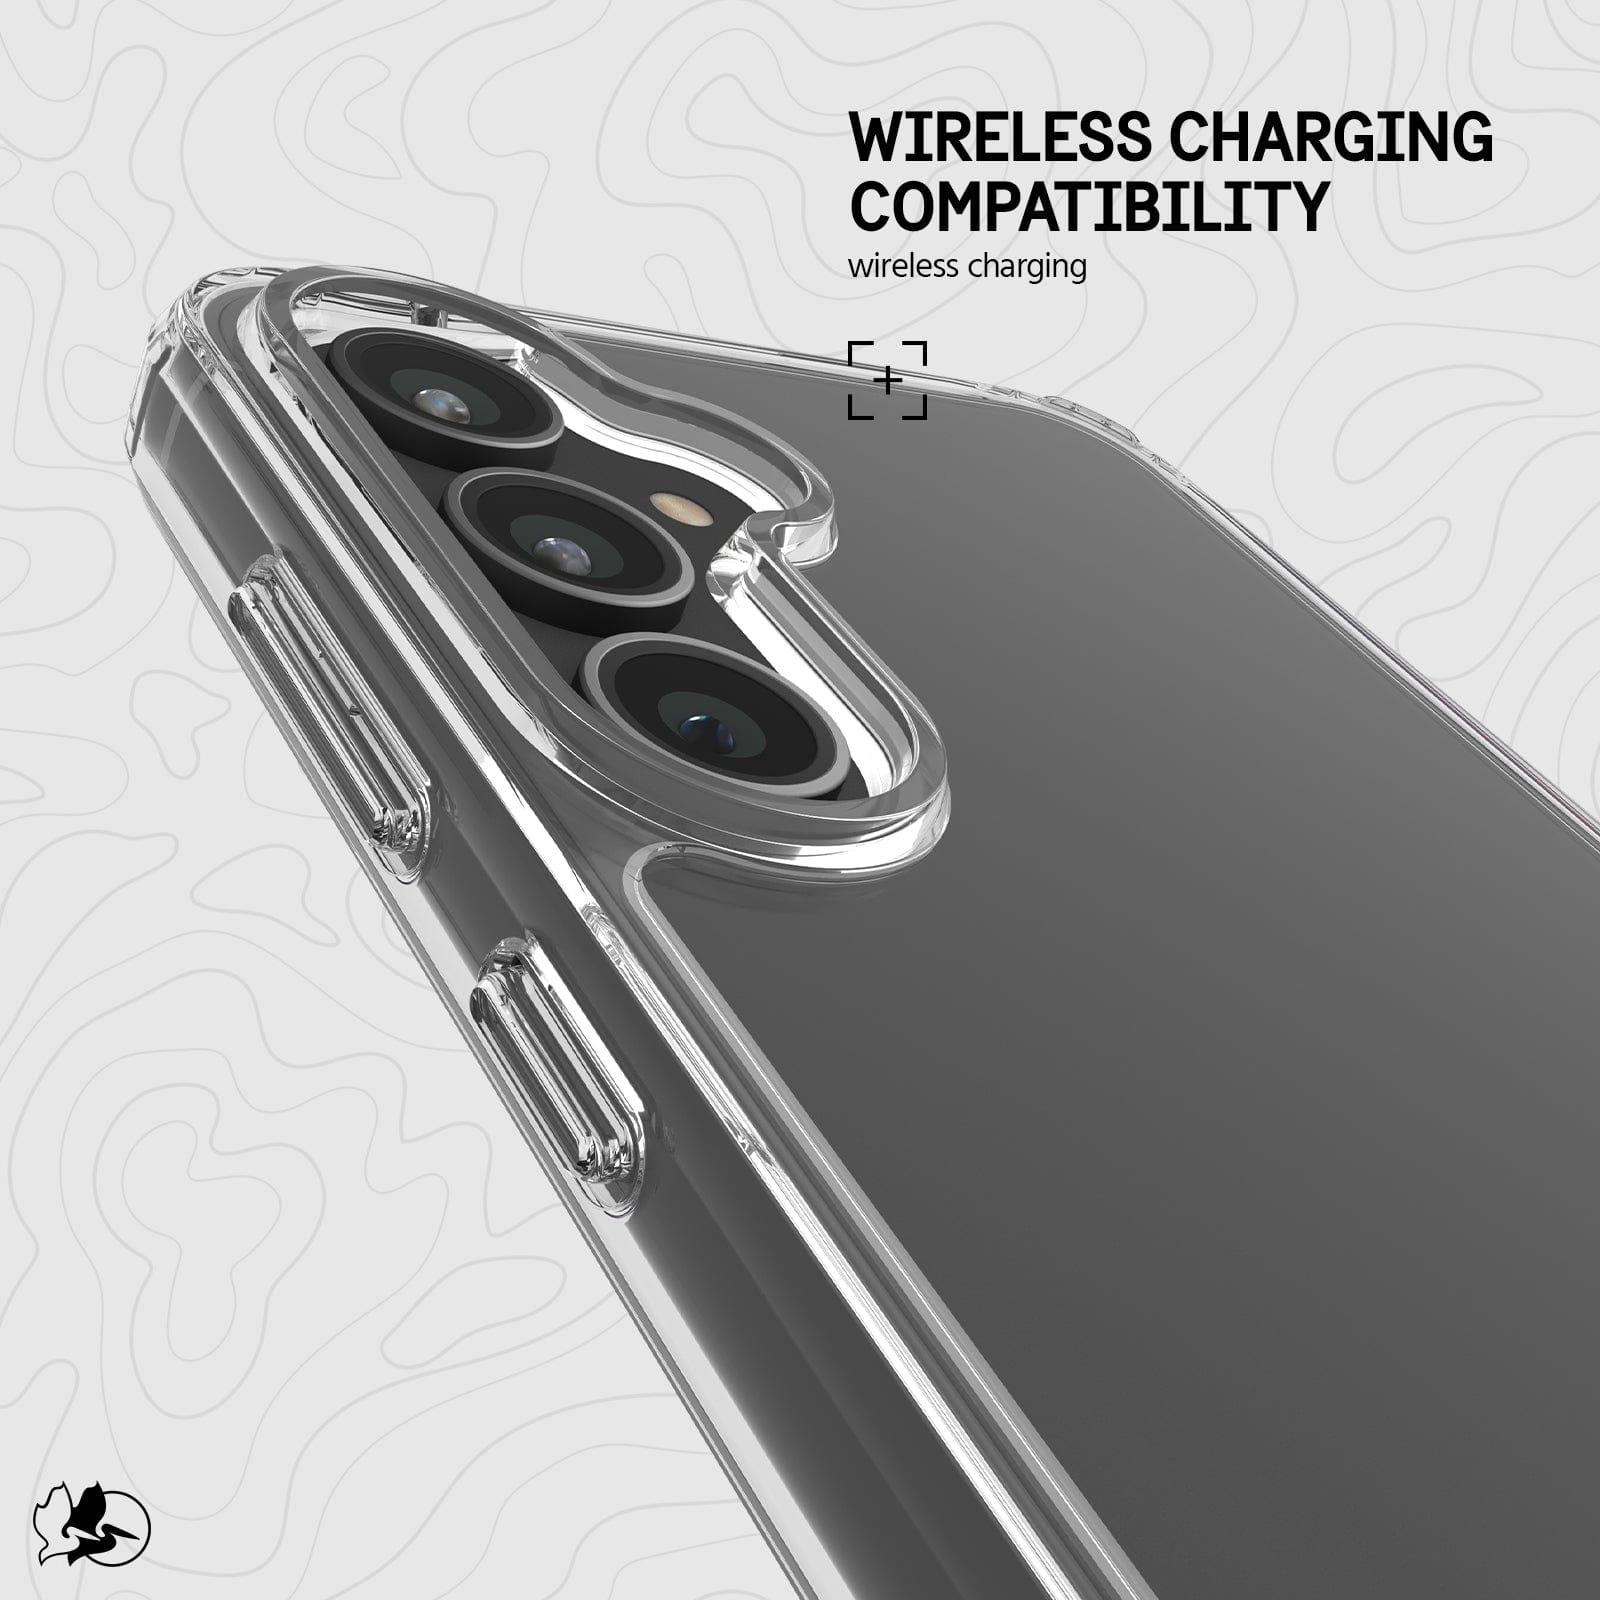 WIRELESS CHARGING COMPATIBILITY WIRELESS CHARGING